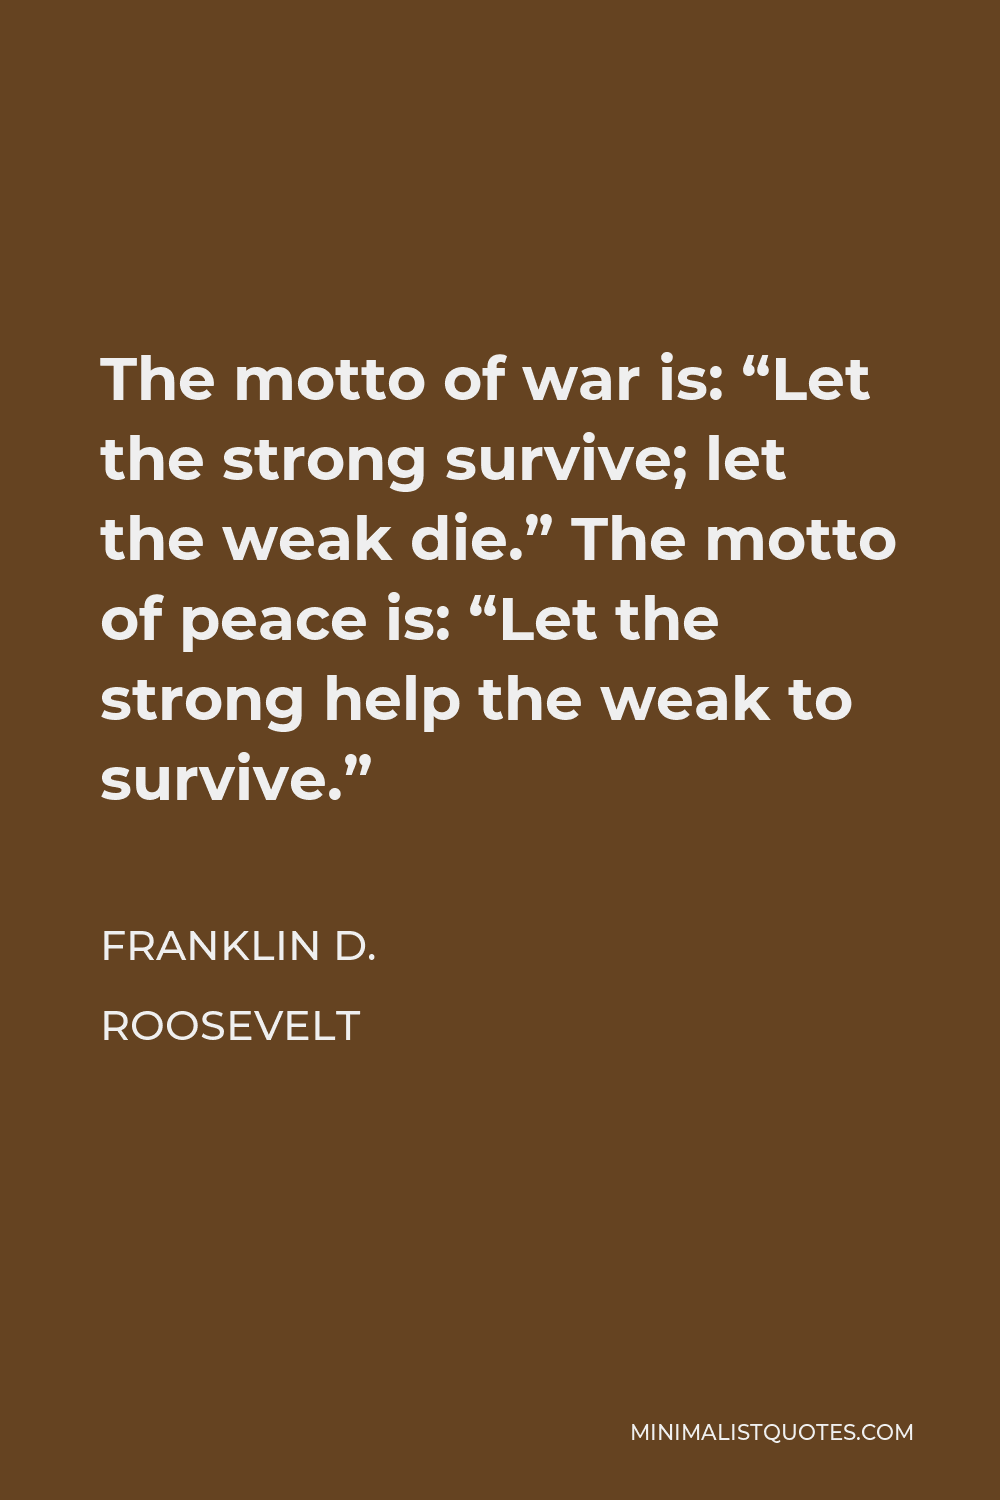 Franklin D. Roosevelt Quote - The motto of war is: “Let the strong survive; let the weak die.” The motto of peace is: “Let the strong help the weak to survive.”